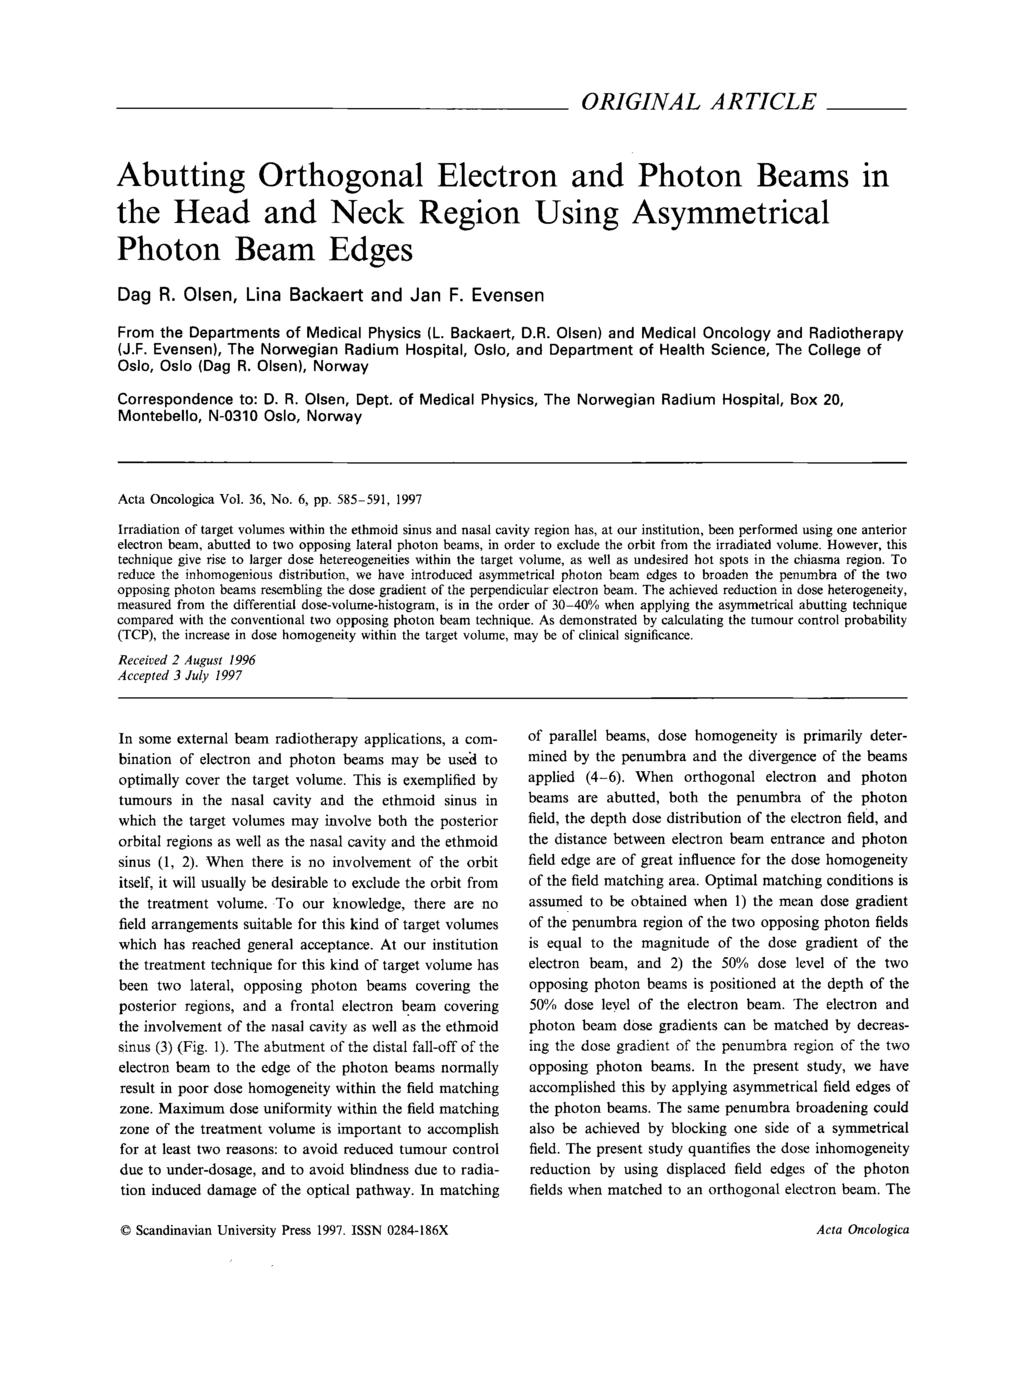 ORIGINAL ARTICLE Abutting Orthogonal Electron and Photon Beams in the Head and Neck Region Using Asymmetrical Photon Beam Edges Dag R. Olsen, Lina Backaert and Jan F.